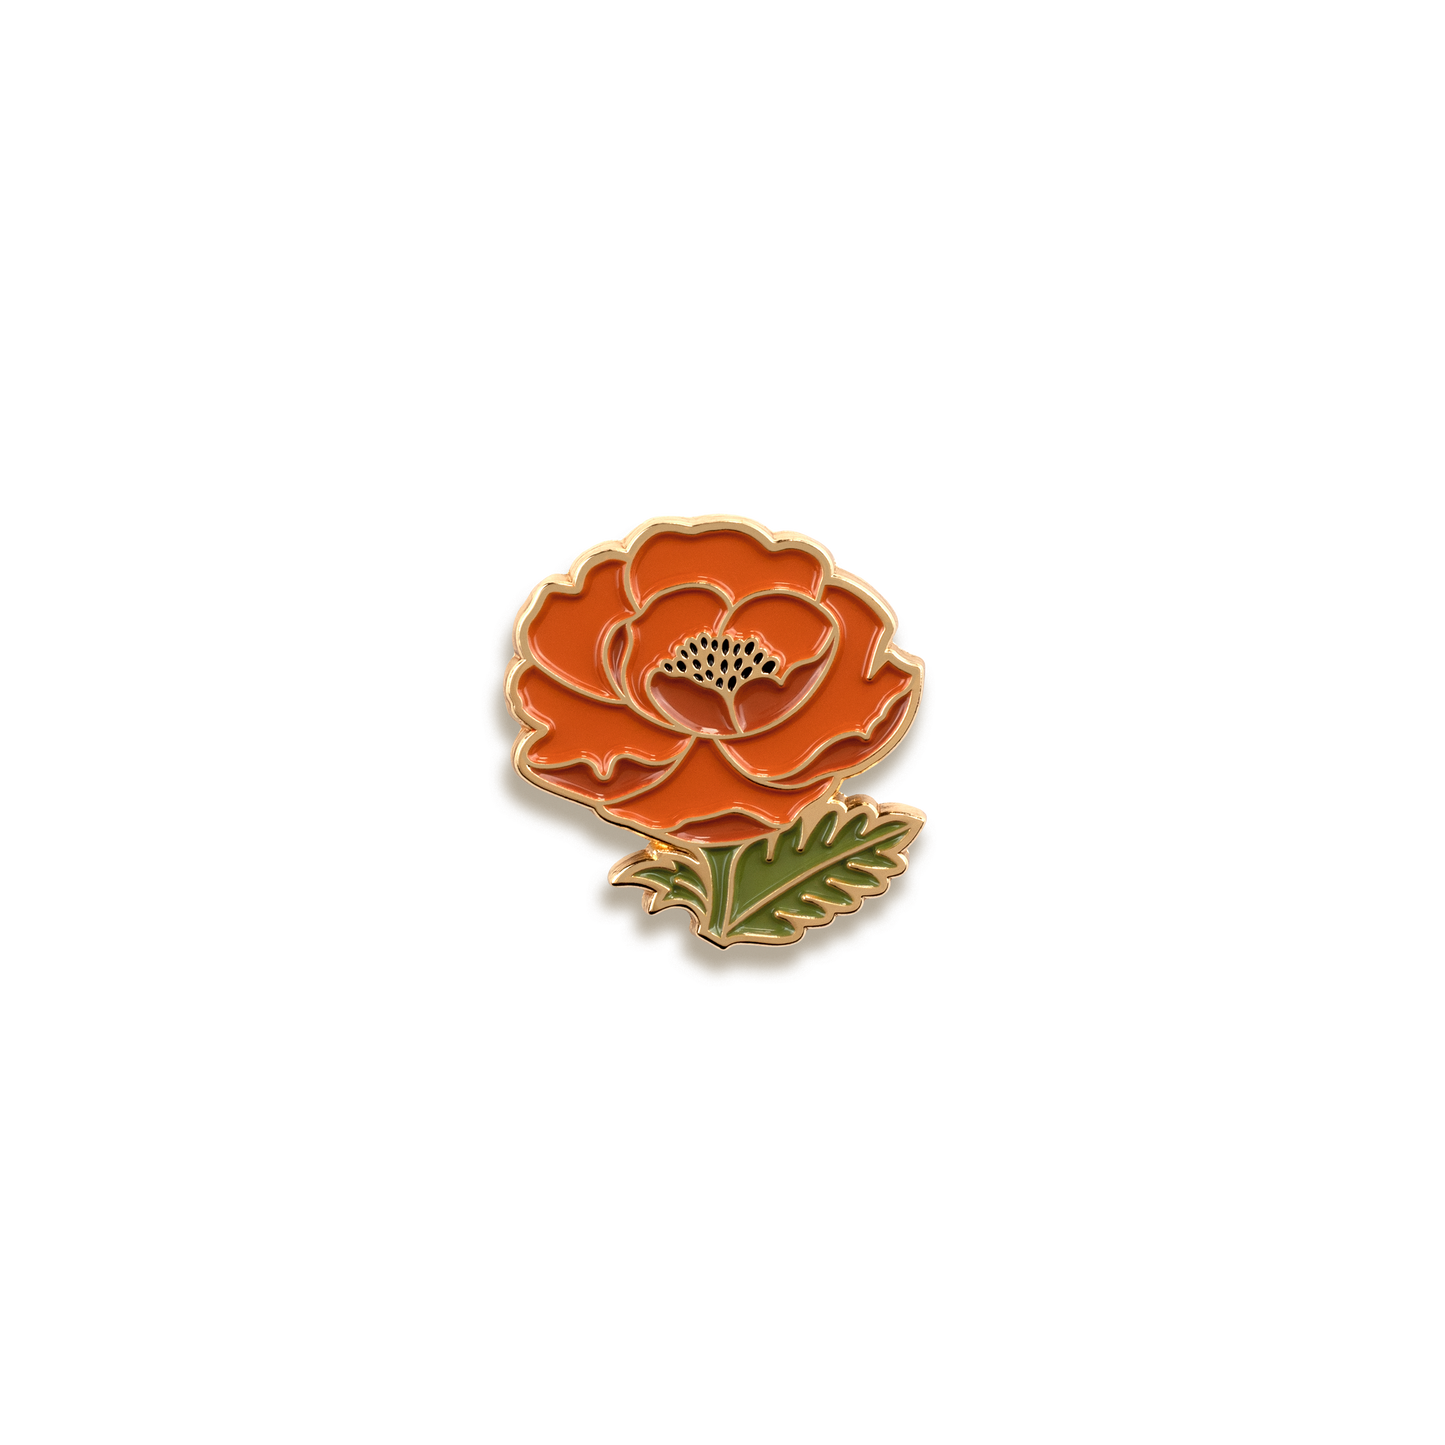 Isabelle Poppy Enamel Pin by Paper Anchor Co.